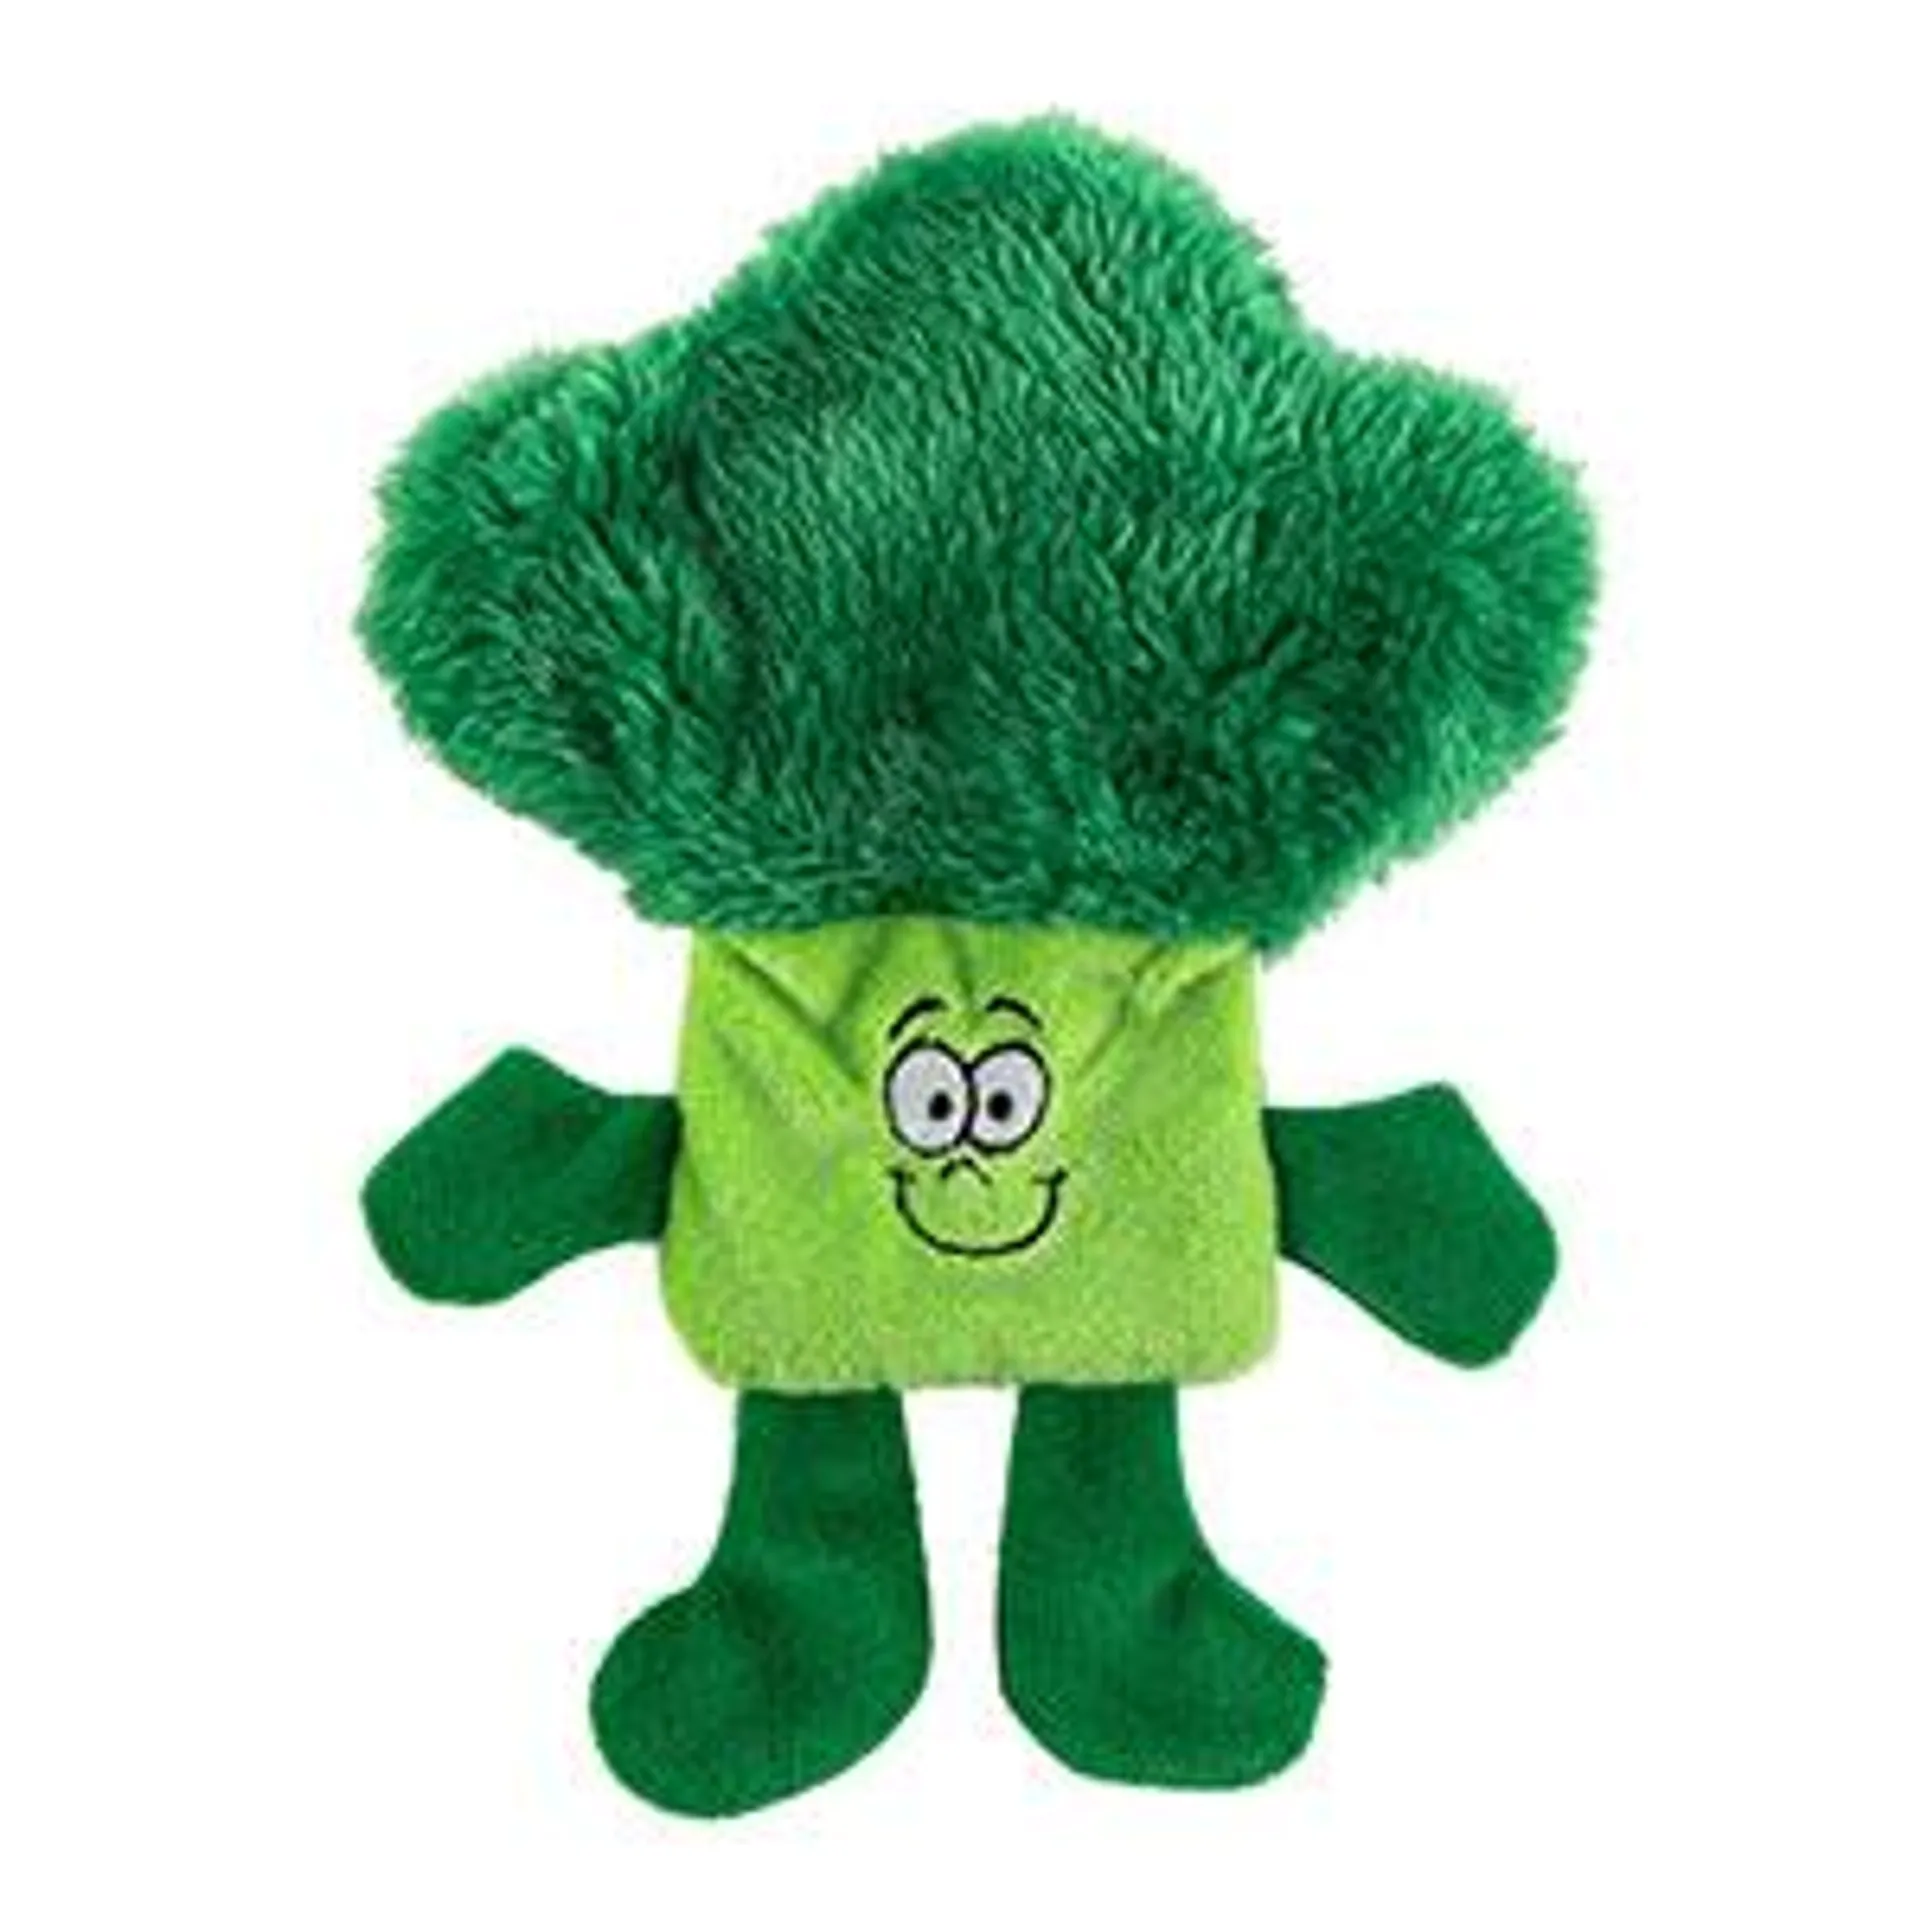 Pets at Home Broccoli Flattie Crackle and Squeak Dog Toy Mini